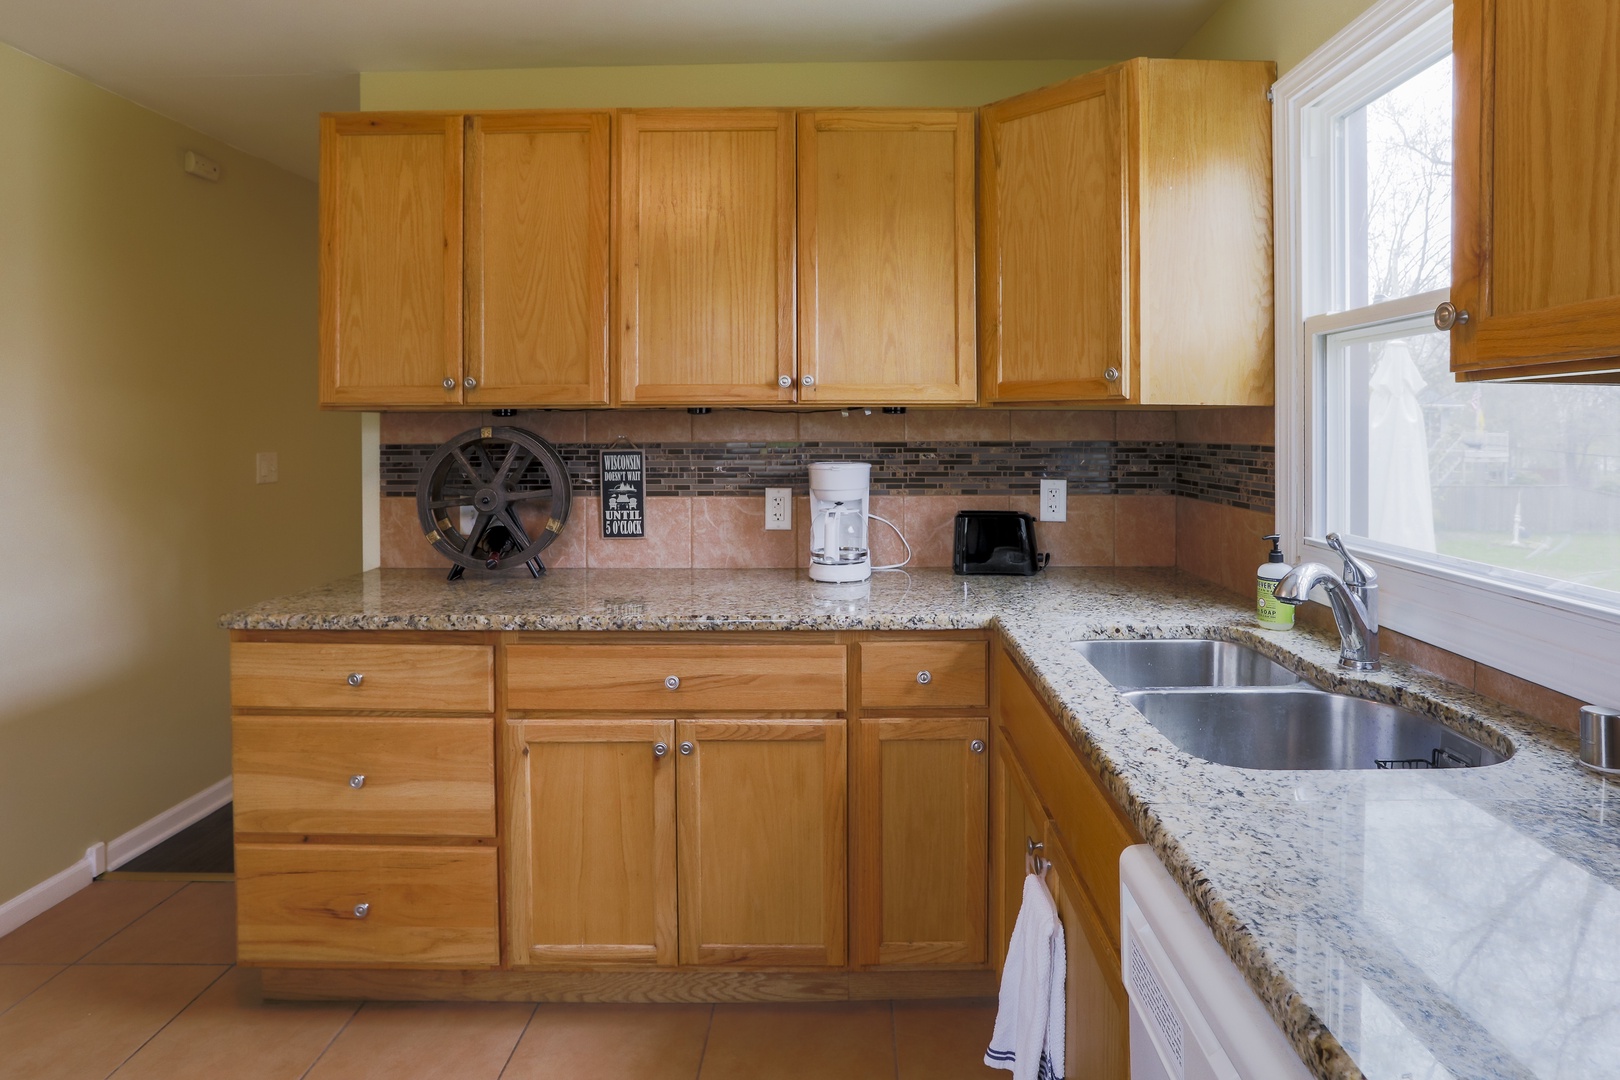 The cozy kitchen is well-equipped and offers ample storage/counter space